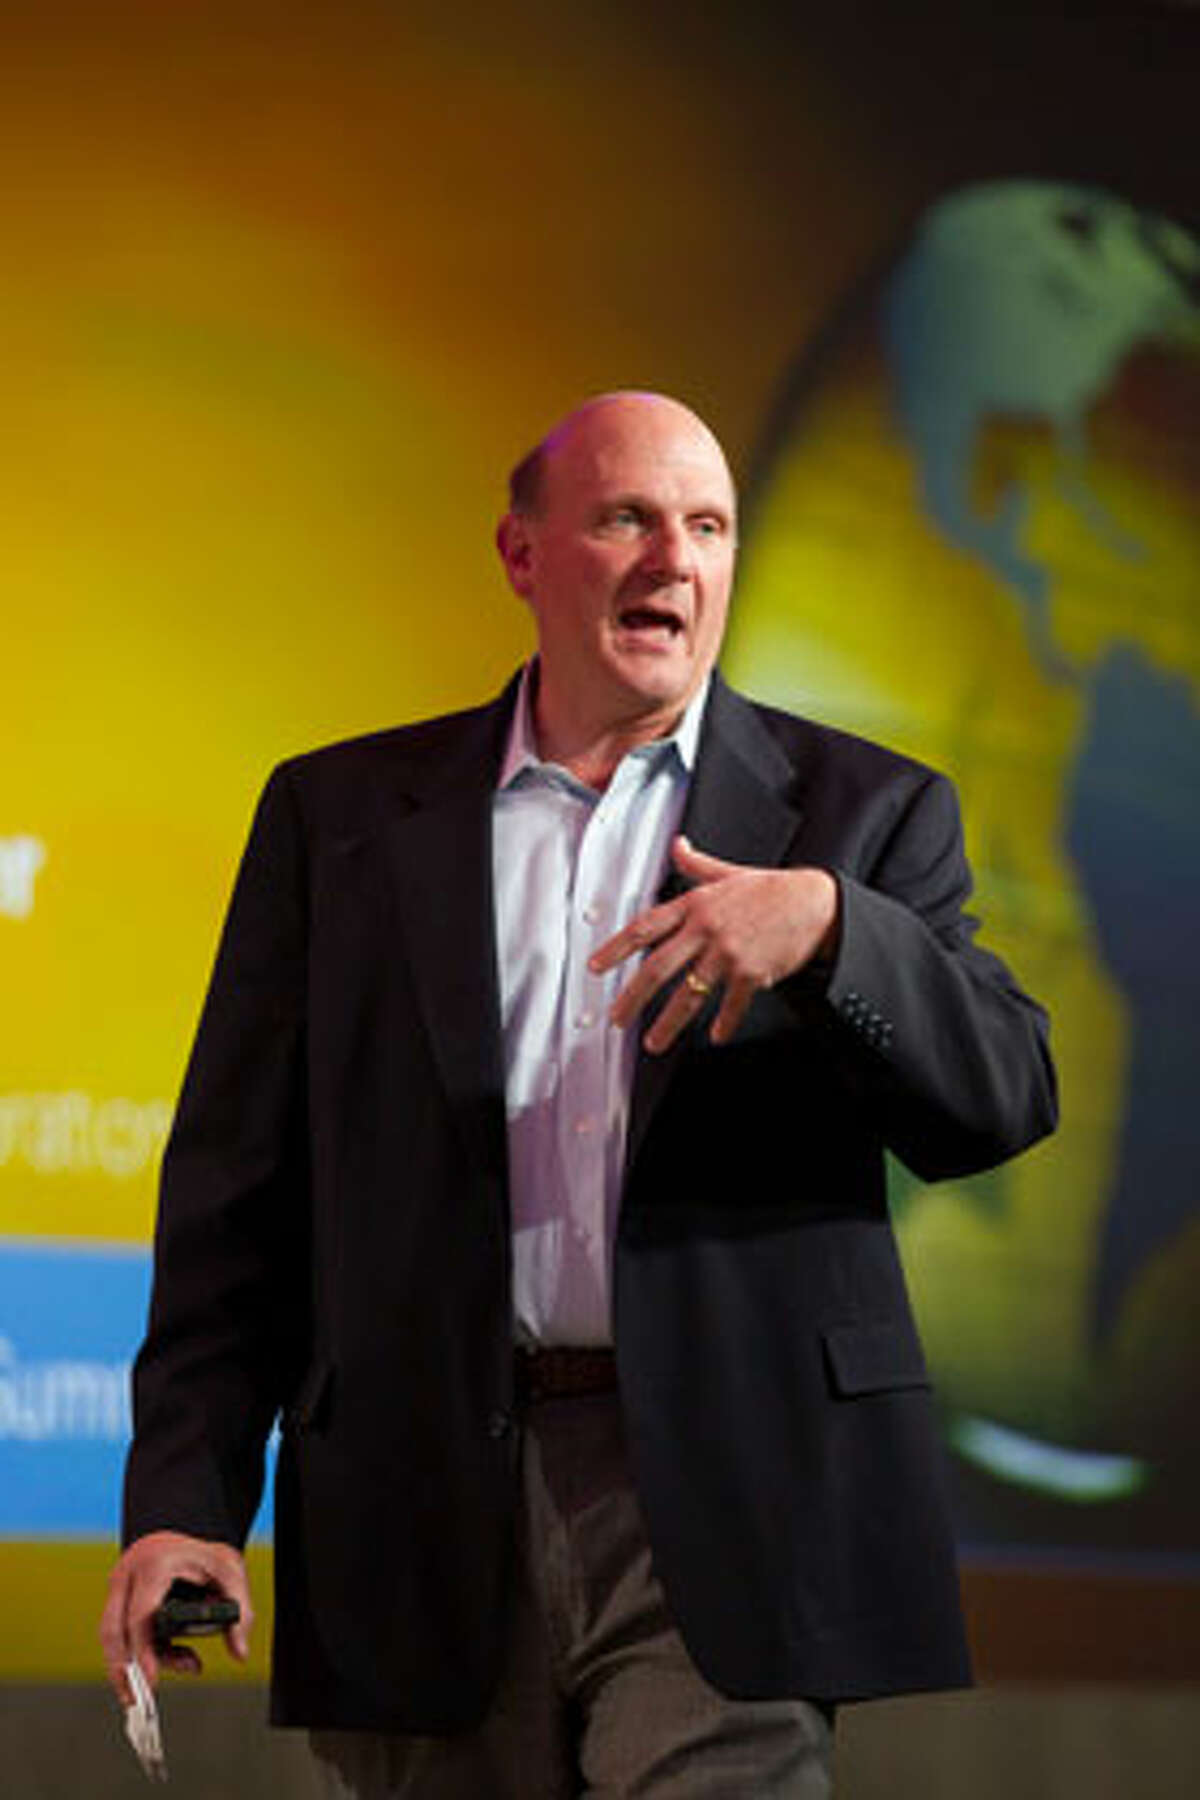 Microsoft CEO Steve Ballmer addresses global business leaders at the Microsoft CEO Summit 2010 on Wednesday, May 19, in Redmond.